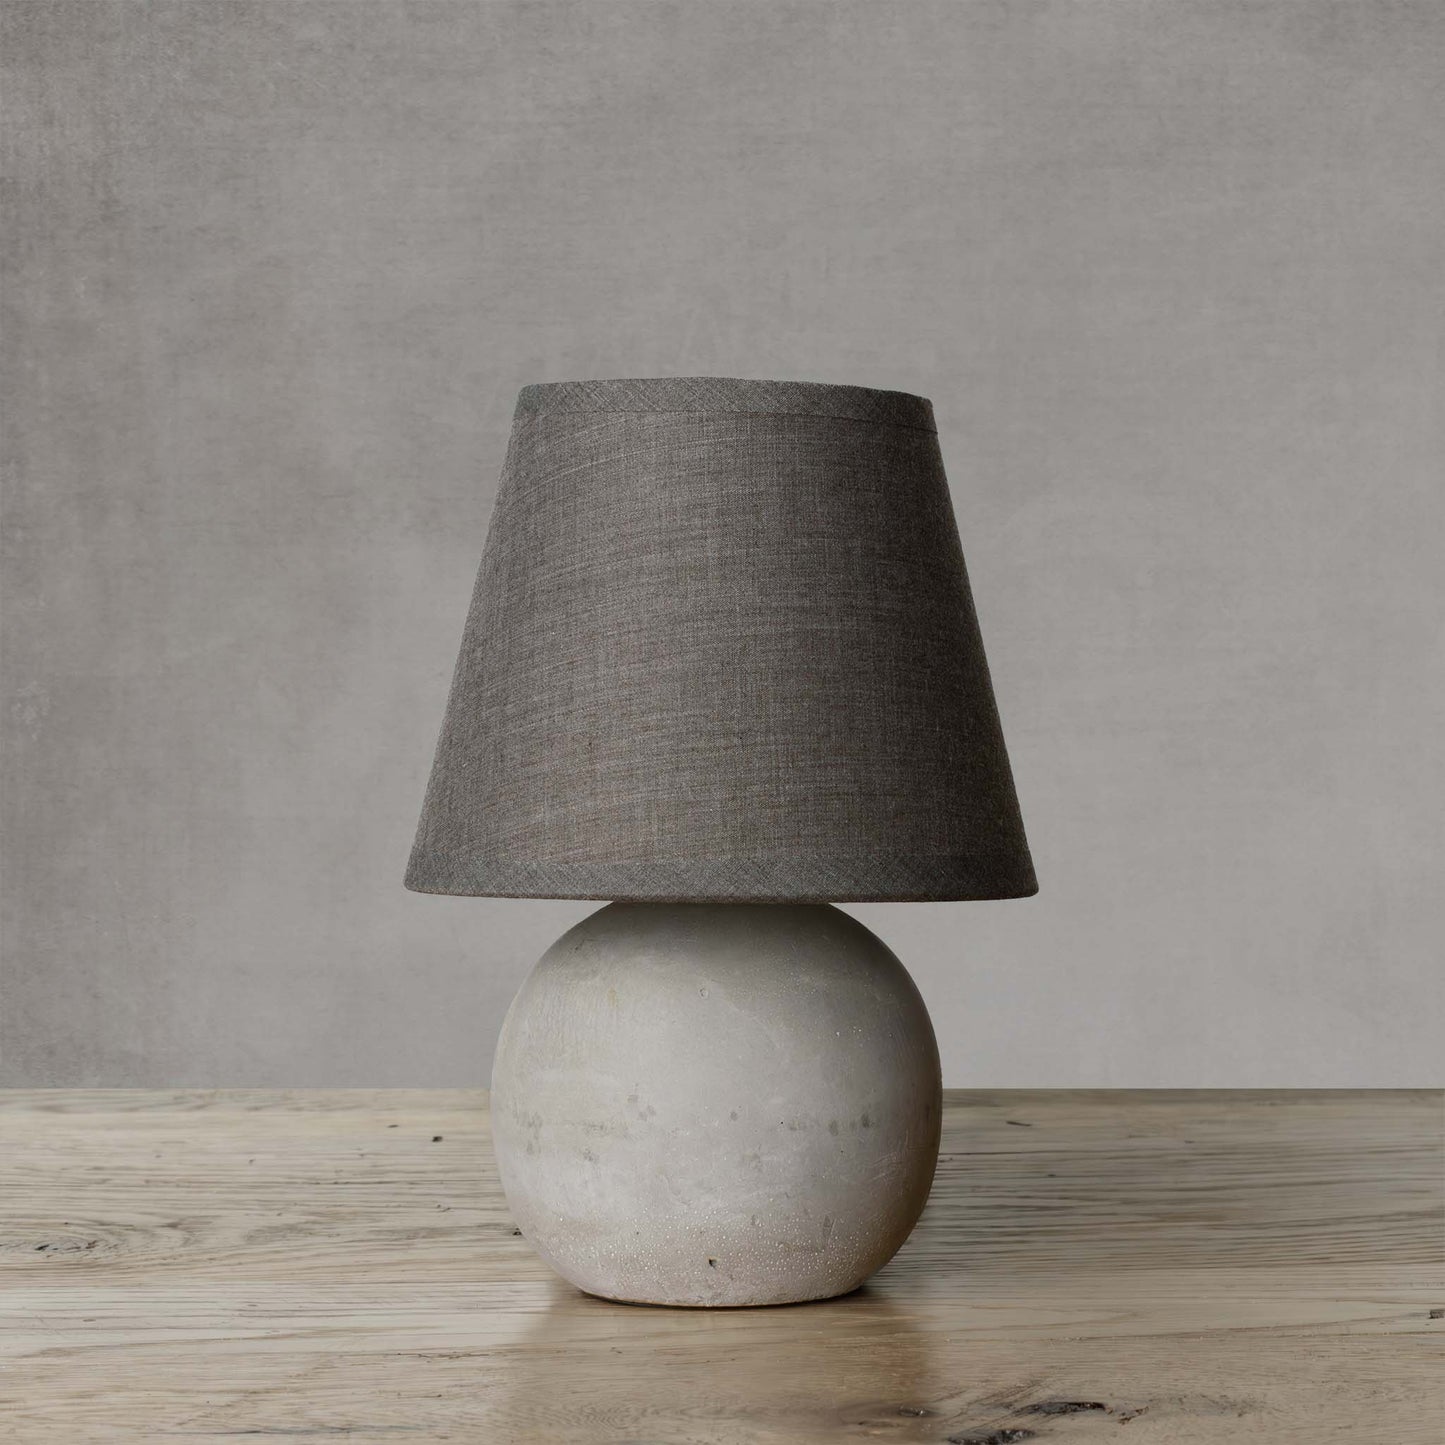 Gray concrete mini lamp with dark gray shade on wooden surface with light gray background.